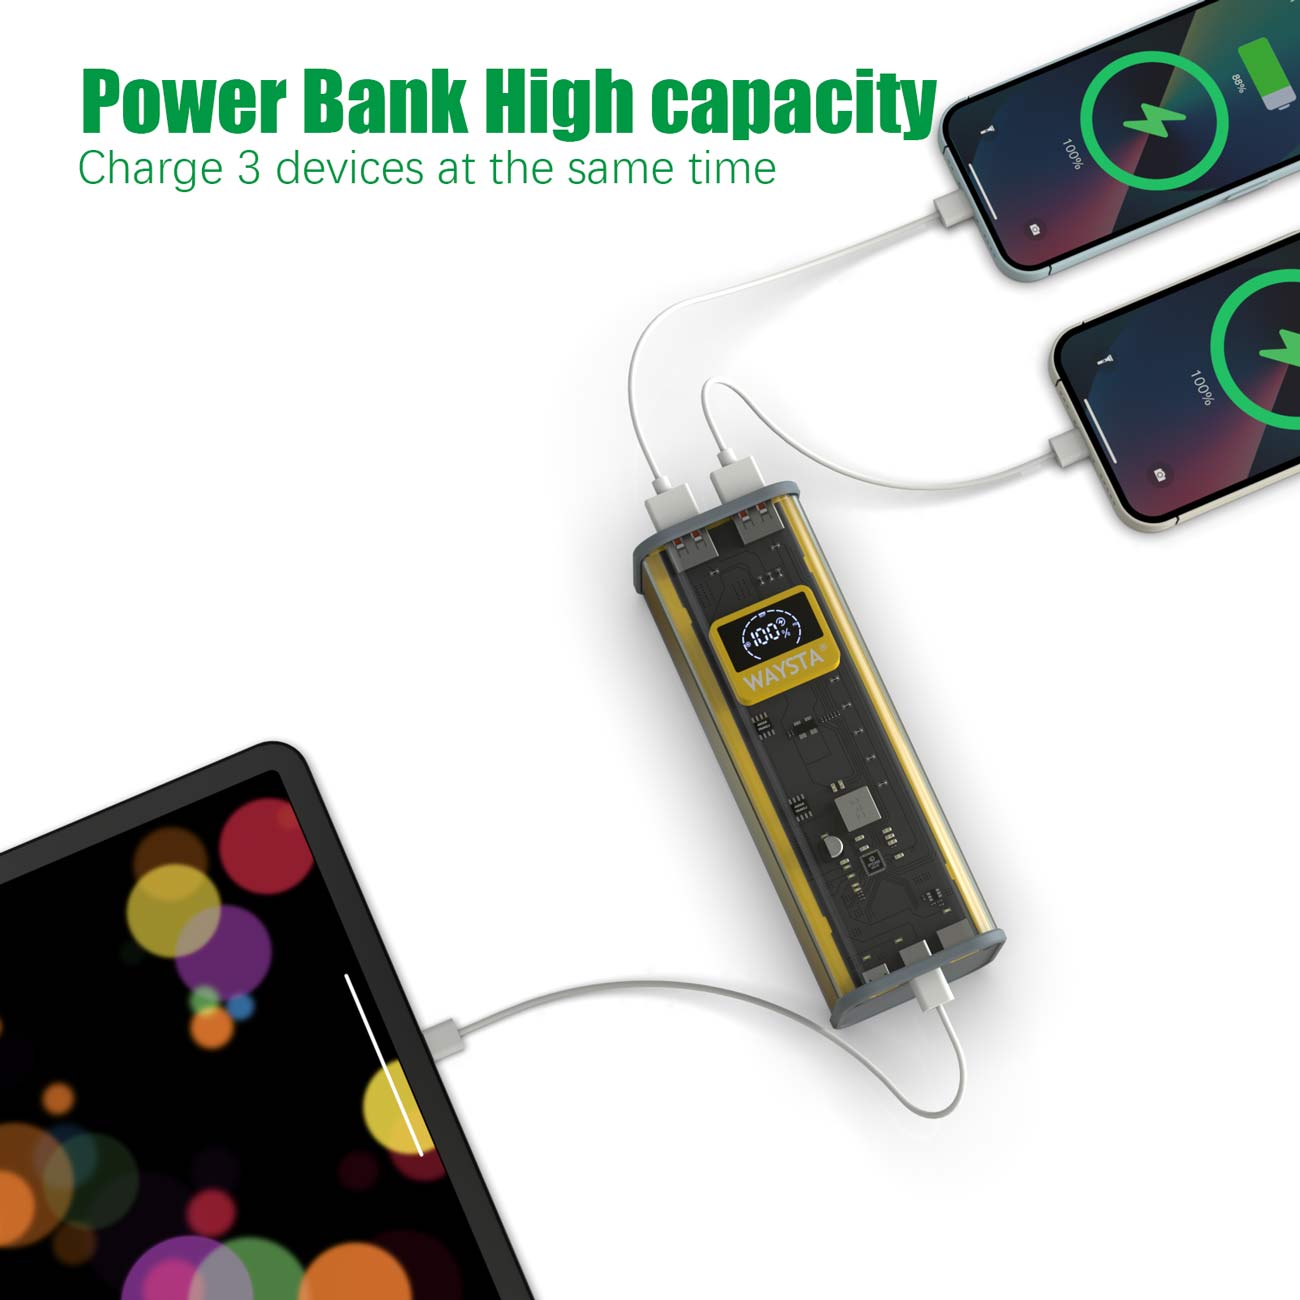 Power bank 80000mAh, Powerbank support QC 3.0 22.5W and PD 20W fast charging, digital smart display, TYPE-C input/output Portable Charger for iphone, ipad, Samsung, Huawei, Smartphones etc.